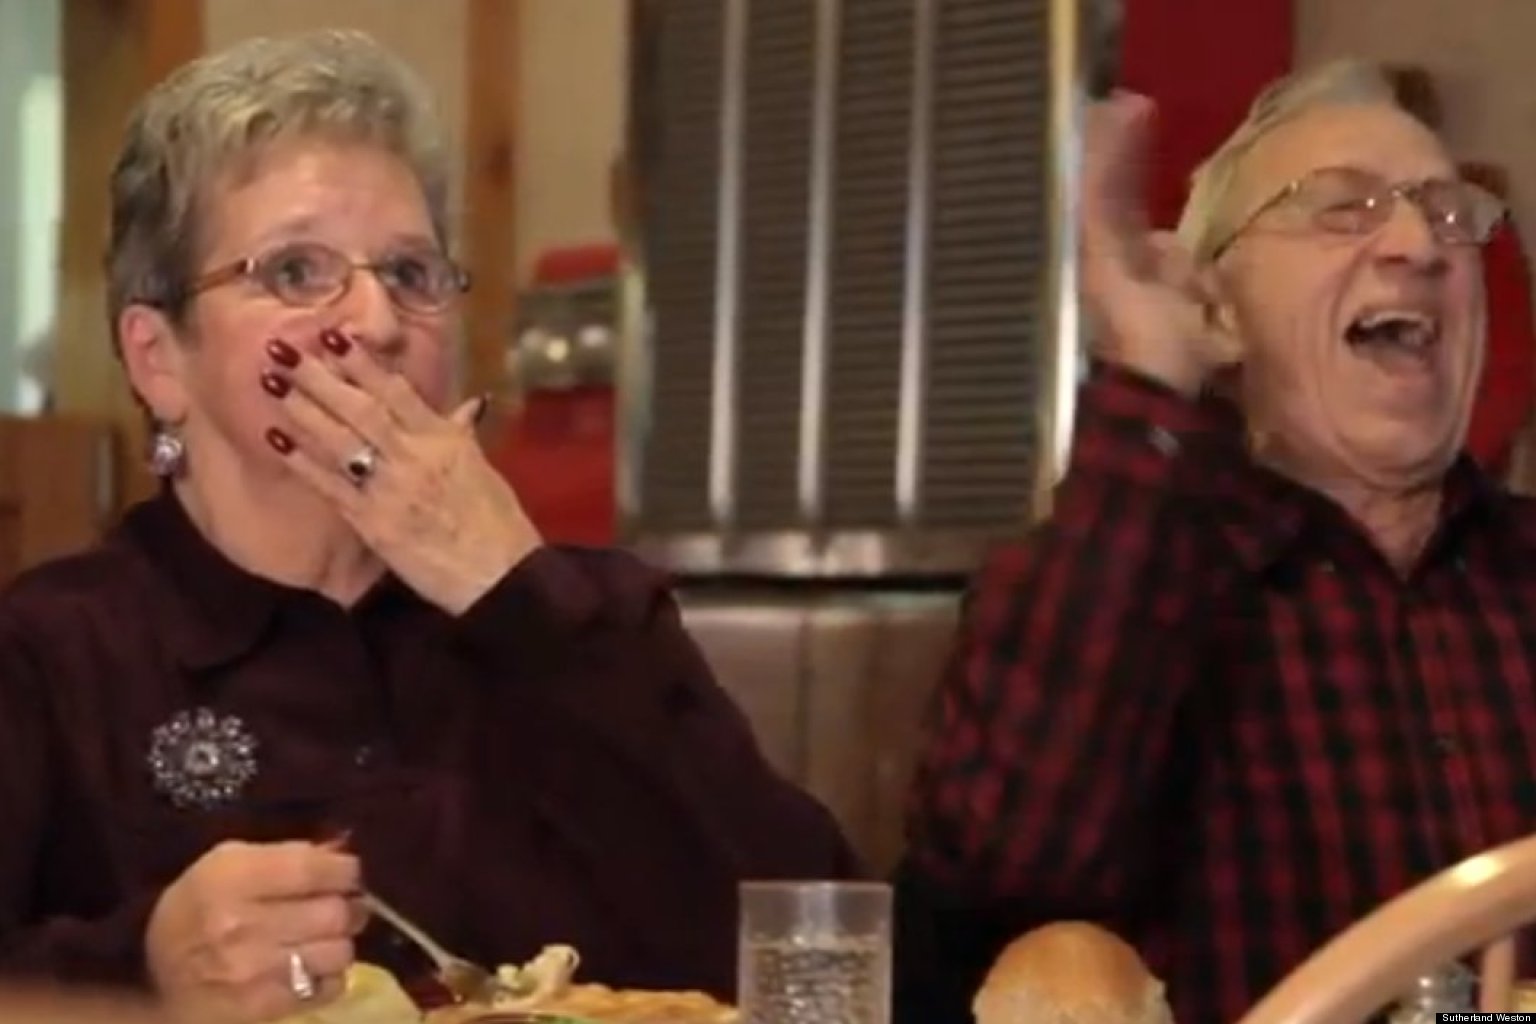 Baked In A Buttery Flaky Crust Dysarts Restaurant Ad Outtakes Are Hilarious And 9375